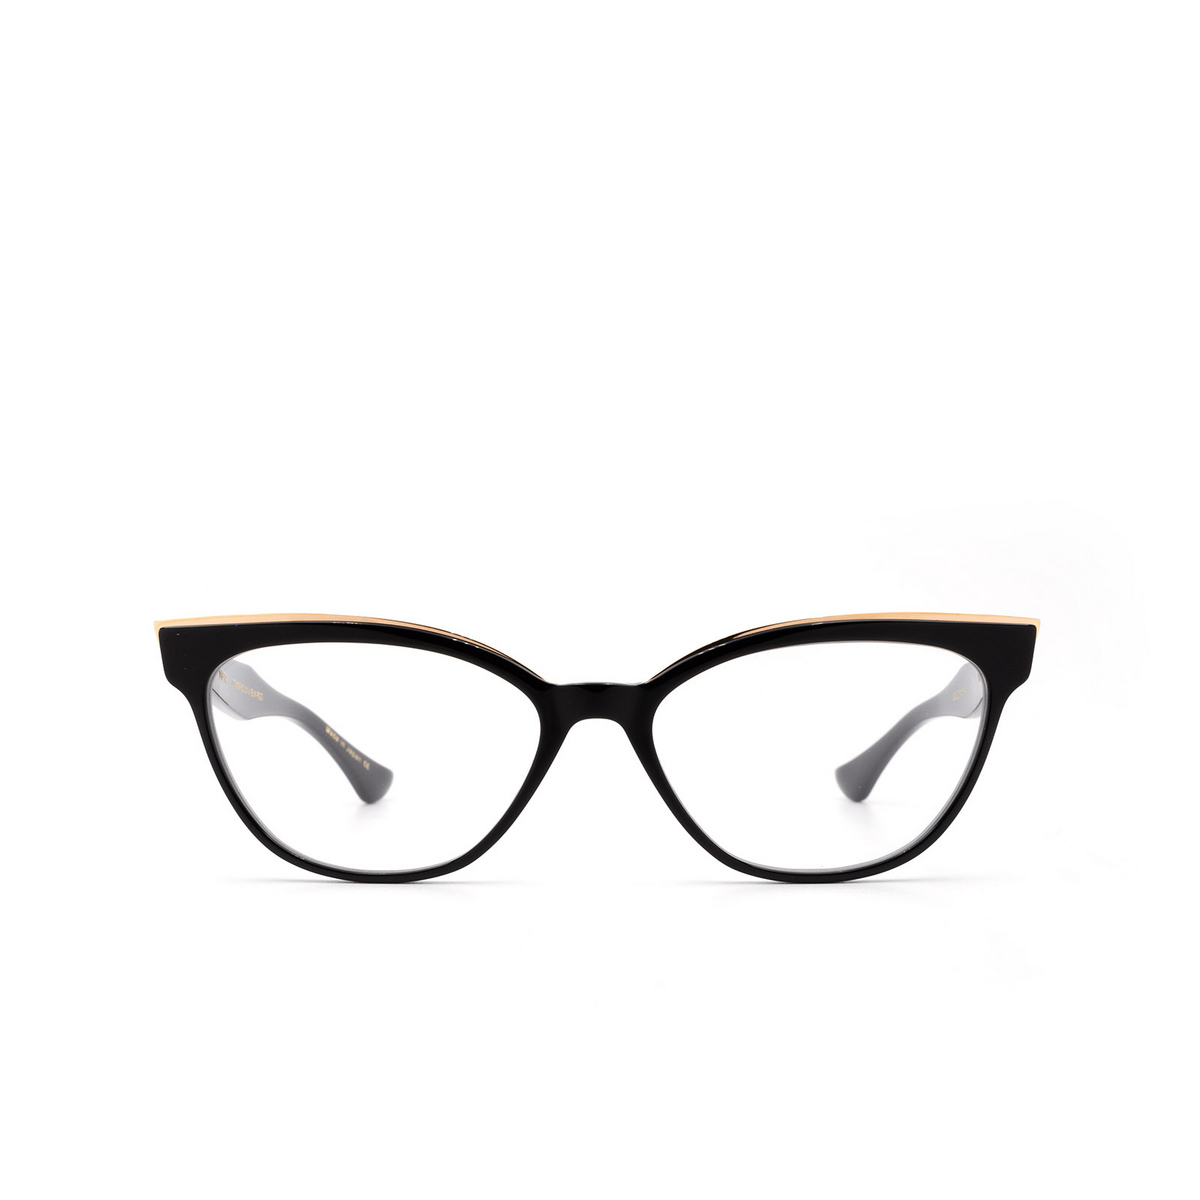 Dita DTX528 Eyeglasses BLK-GRD - front view